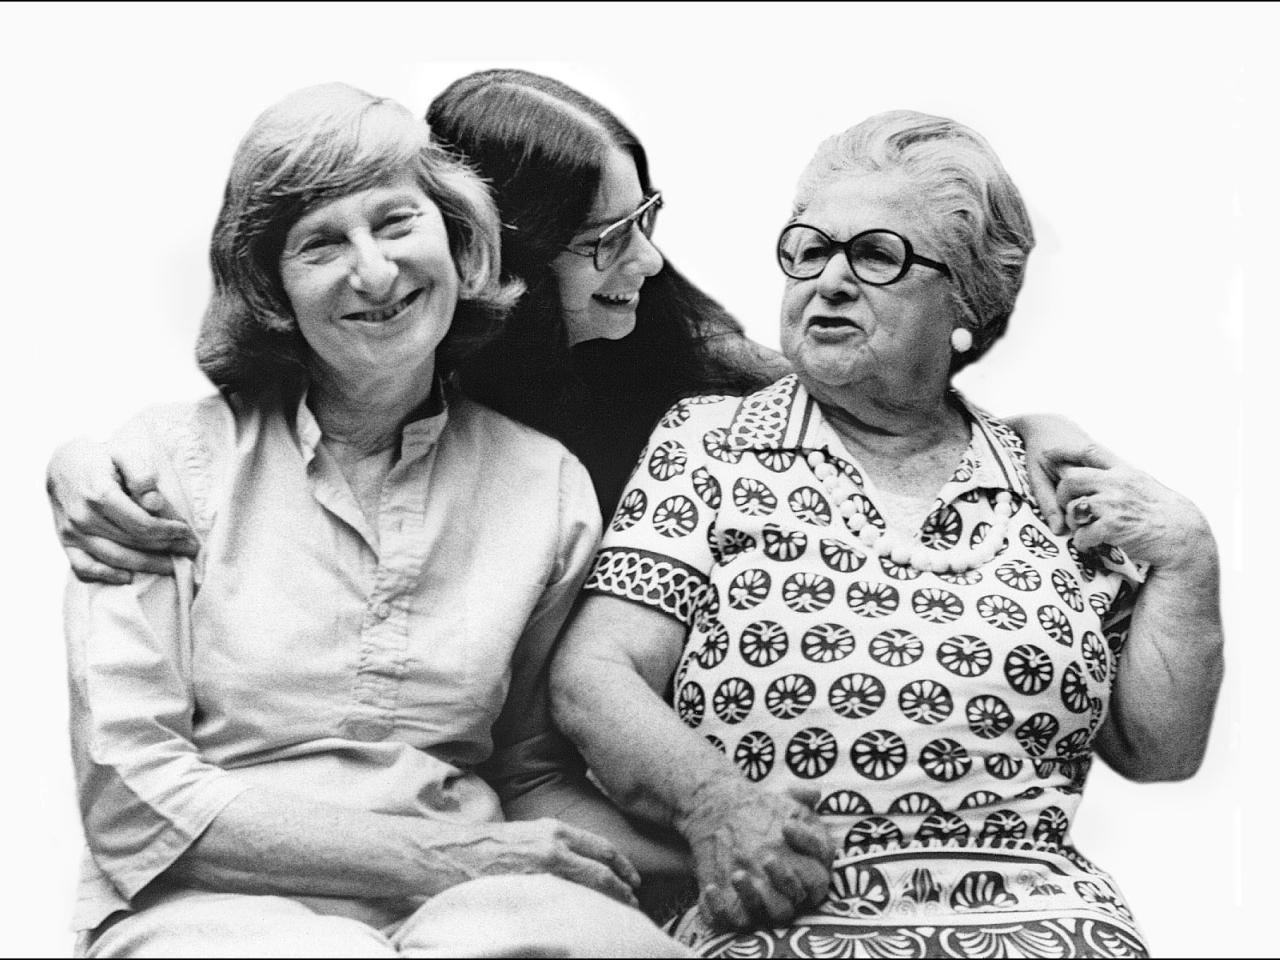 A black and white still from the New Day film, Nana, Mom and Me. A young woman stands behind her mother and grandmother with her arms around them. She glances affectionately towards her grandmother. The grandmother holds her granddaughter’s hand on her shoulder and her daughter's hand on her lap. Beside her, the mother smiles towards the camera.